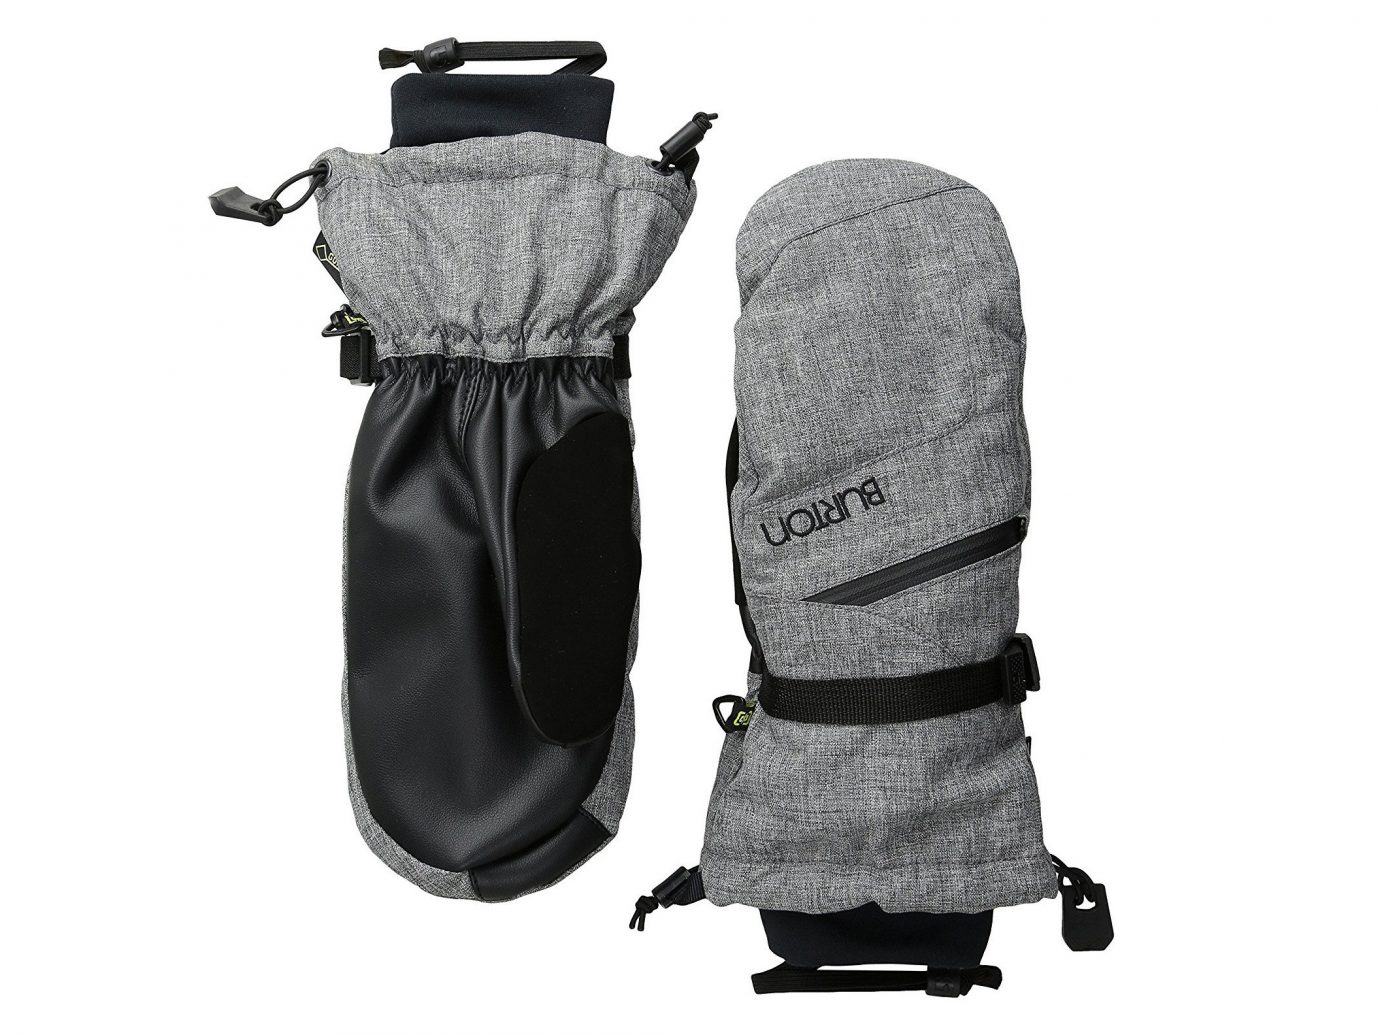 Mountains + Skiing Style + Design Travel Shop product car seat cover product design comfort clothes